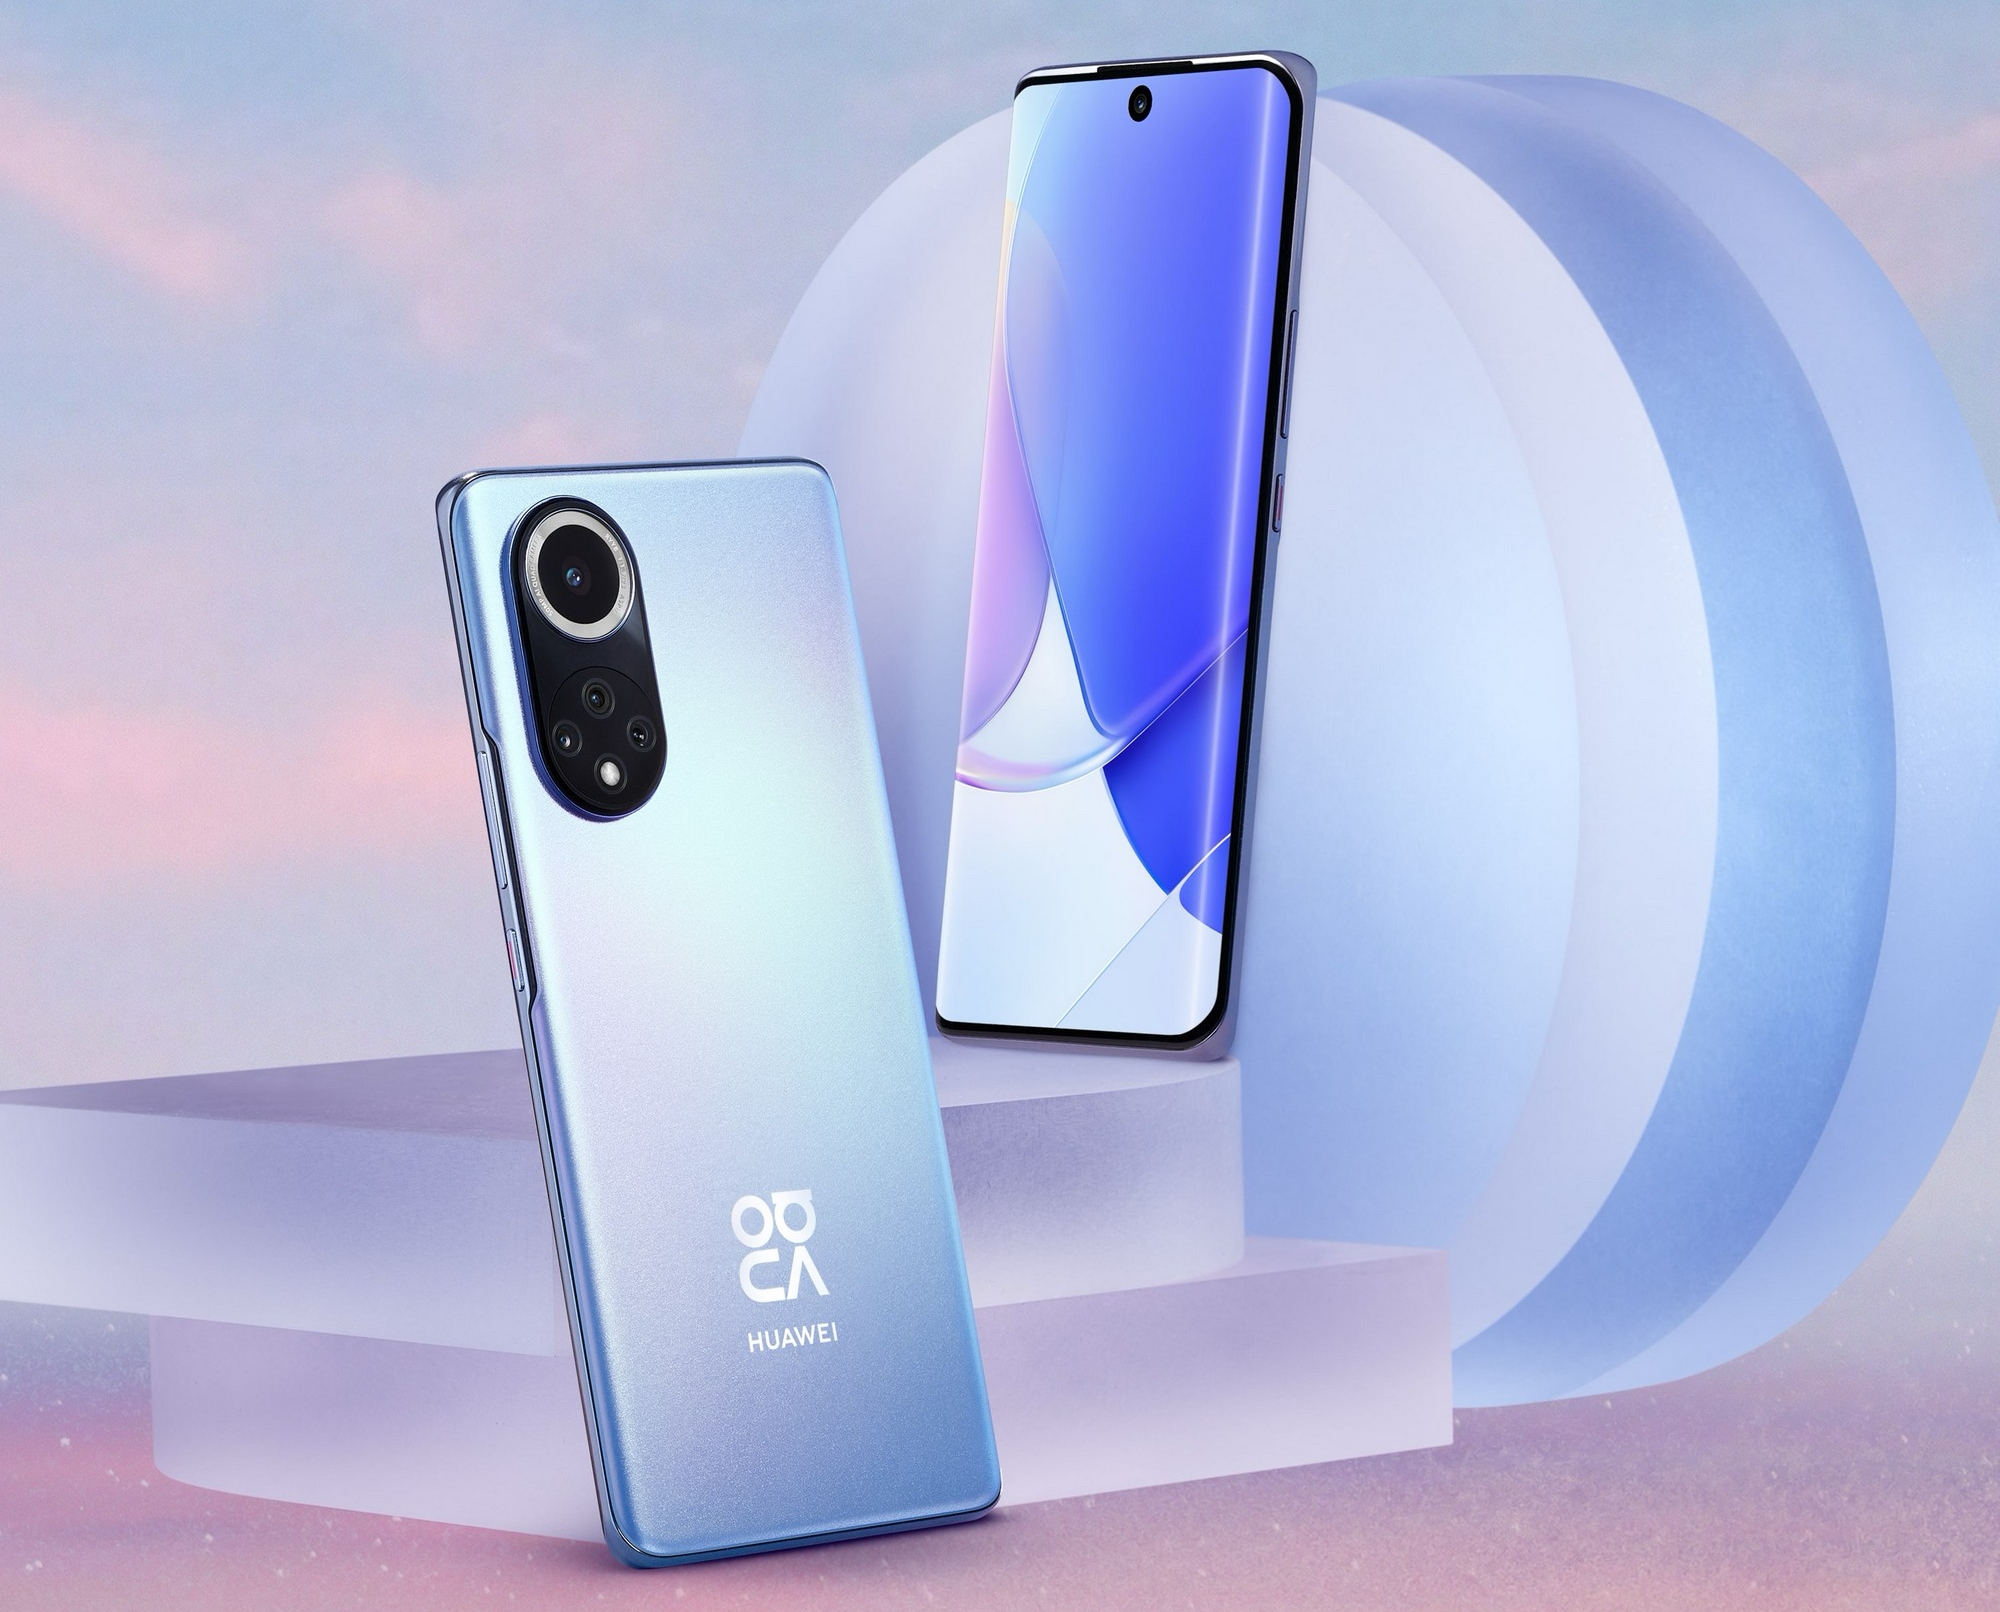 Huawei Nova 9 users have started receiving the July EMUI update